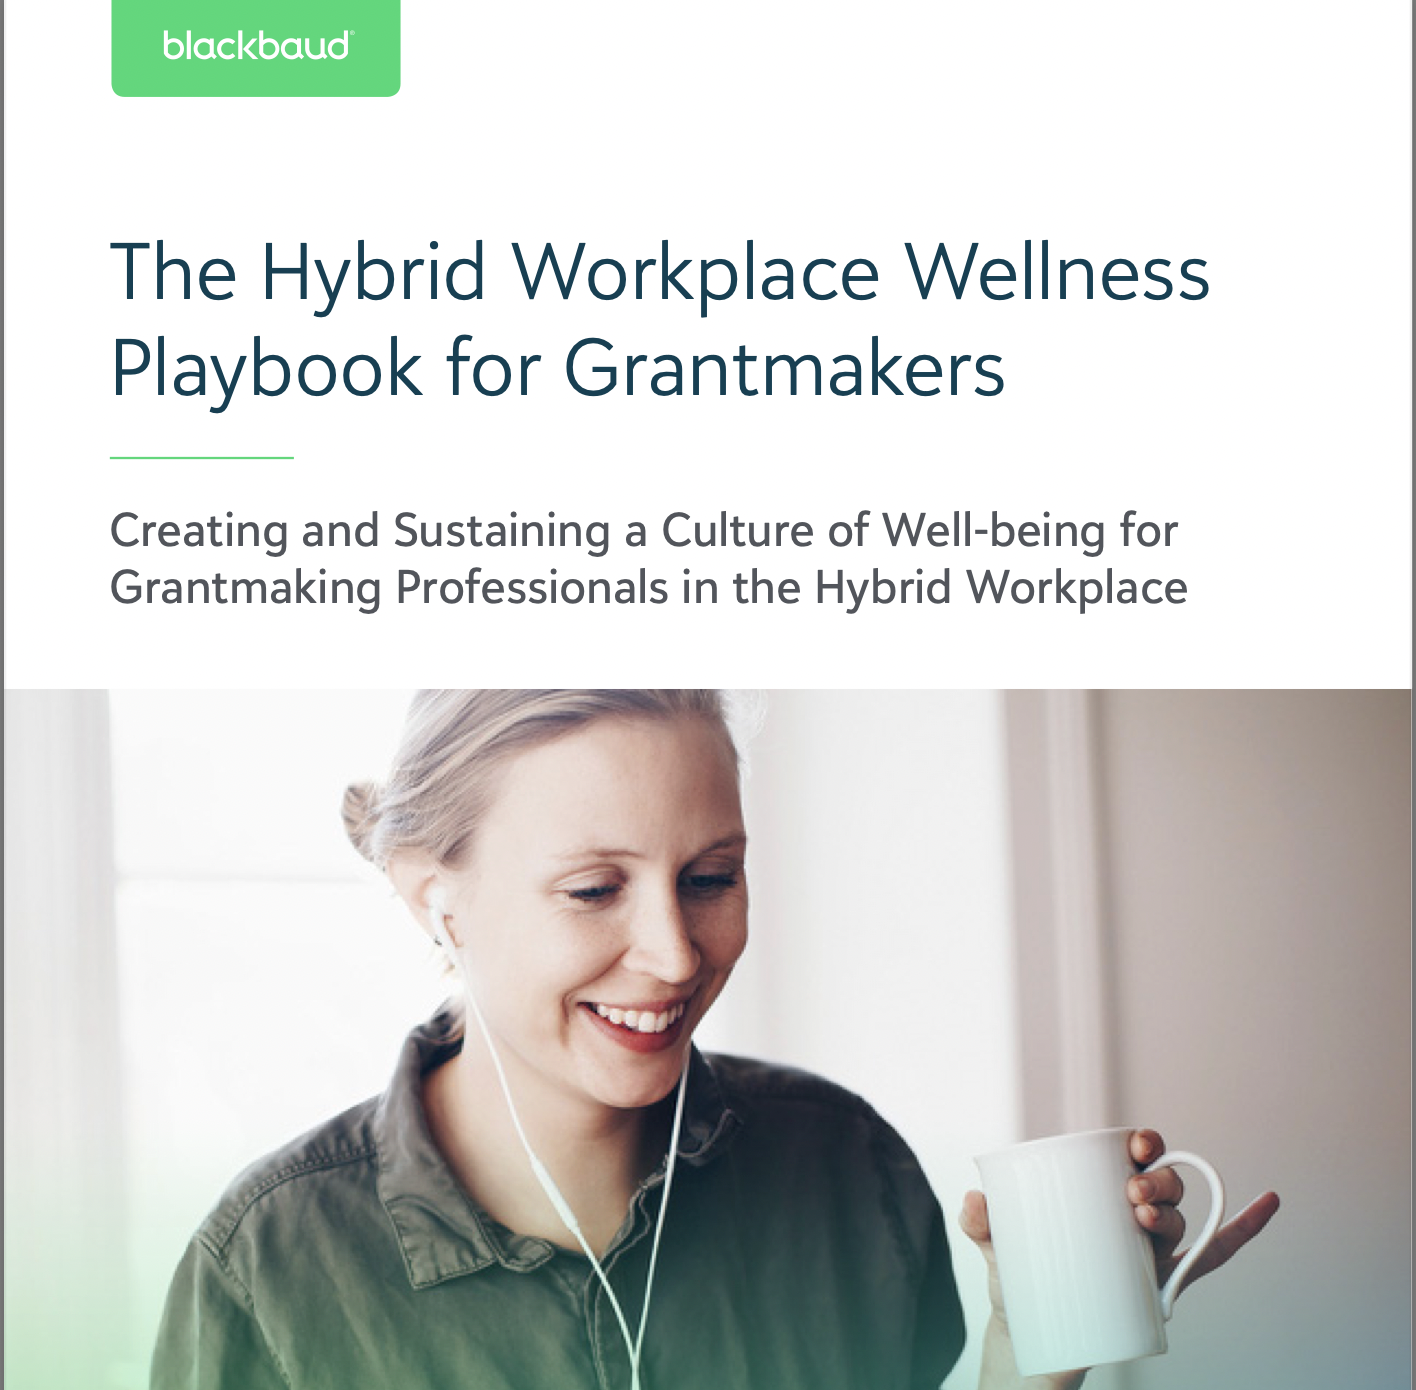 Have you read, "The Hybrid Workplace Wellness Playbook for Grantmakers?" 8700